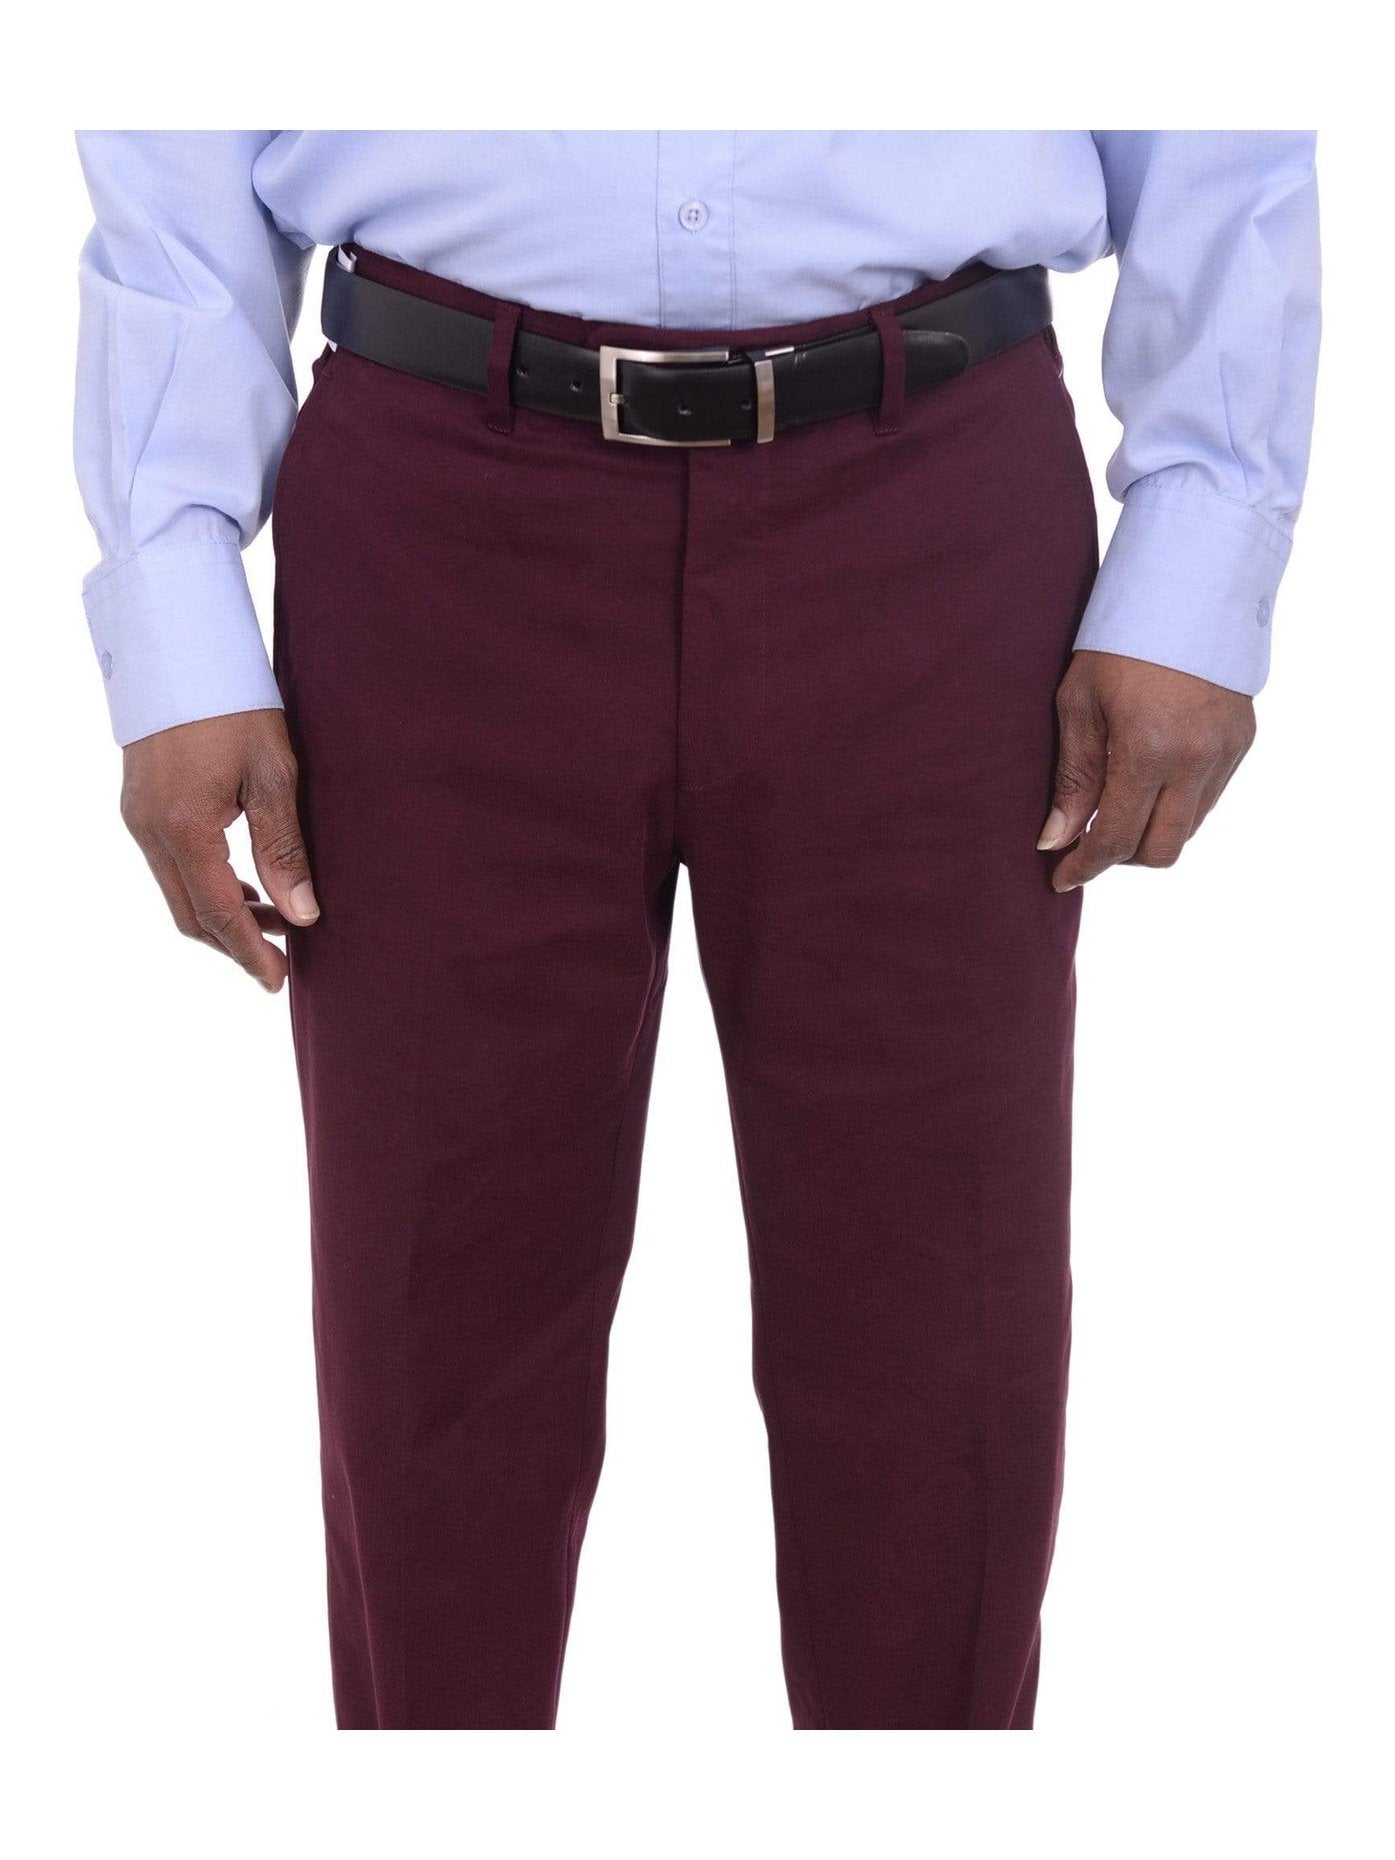 Dark Red & Maroon Pants For Guy's With Shirts Combination Outfits Ideas  2022 | Pants outfit men, Mens outfits, Mens casual outfits summer